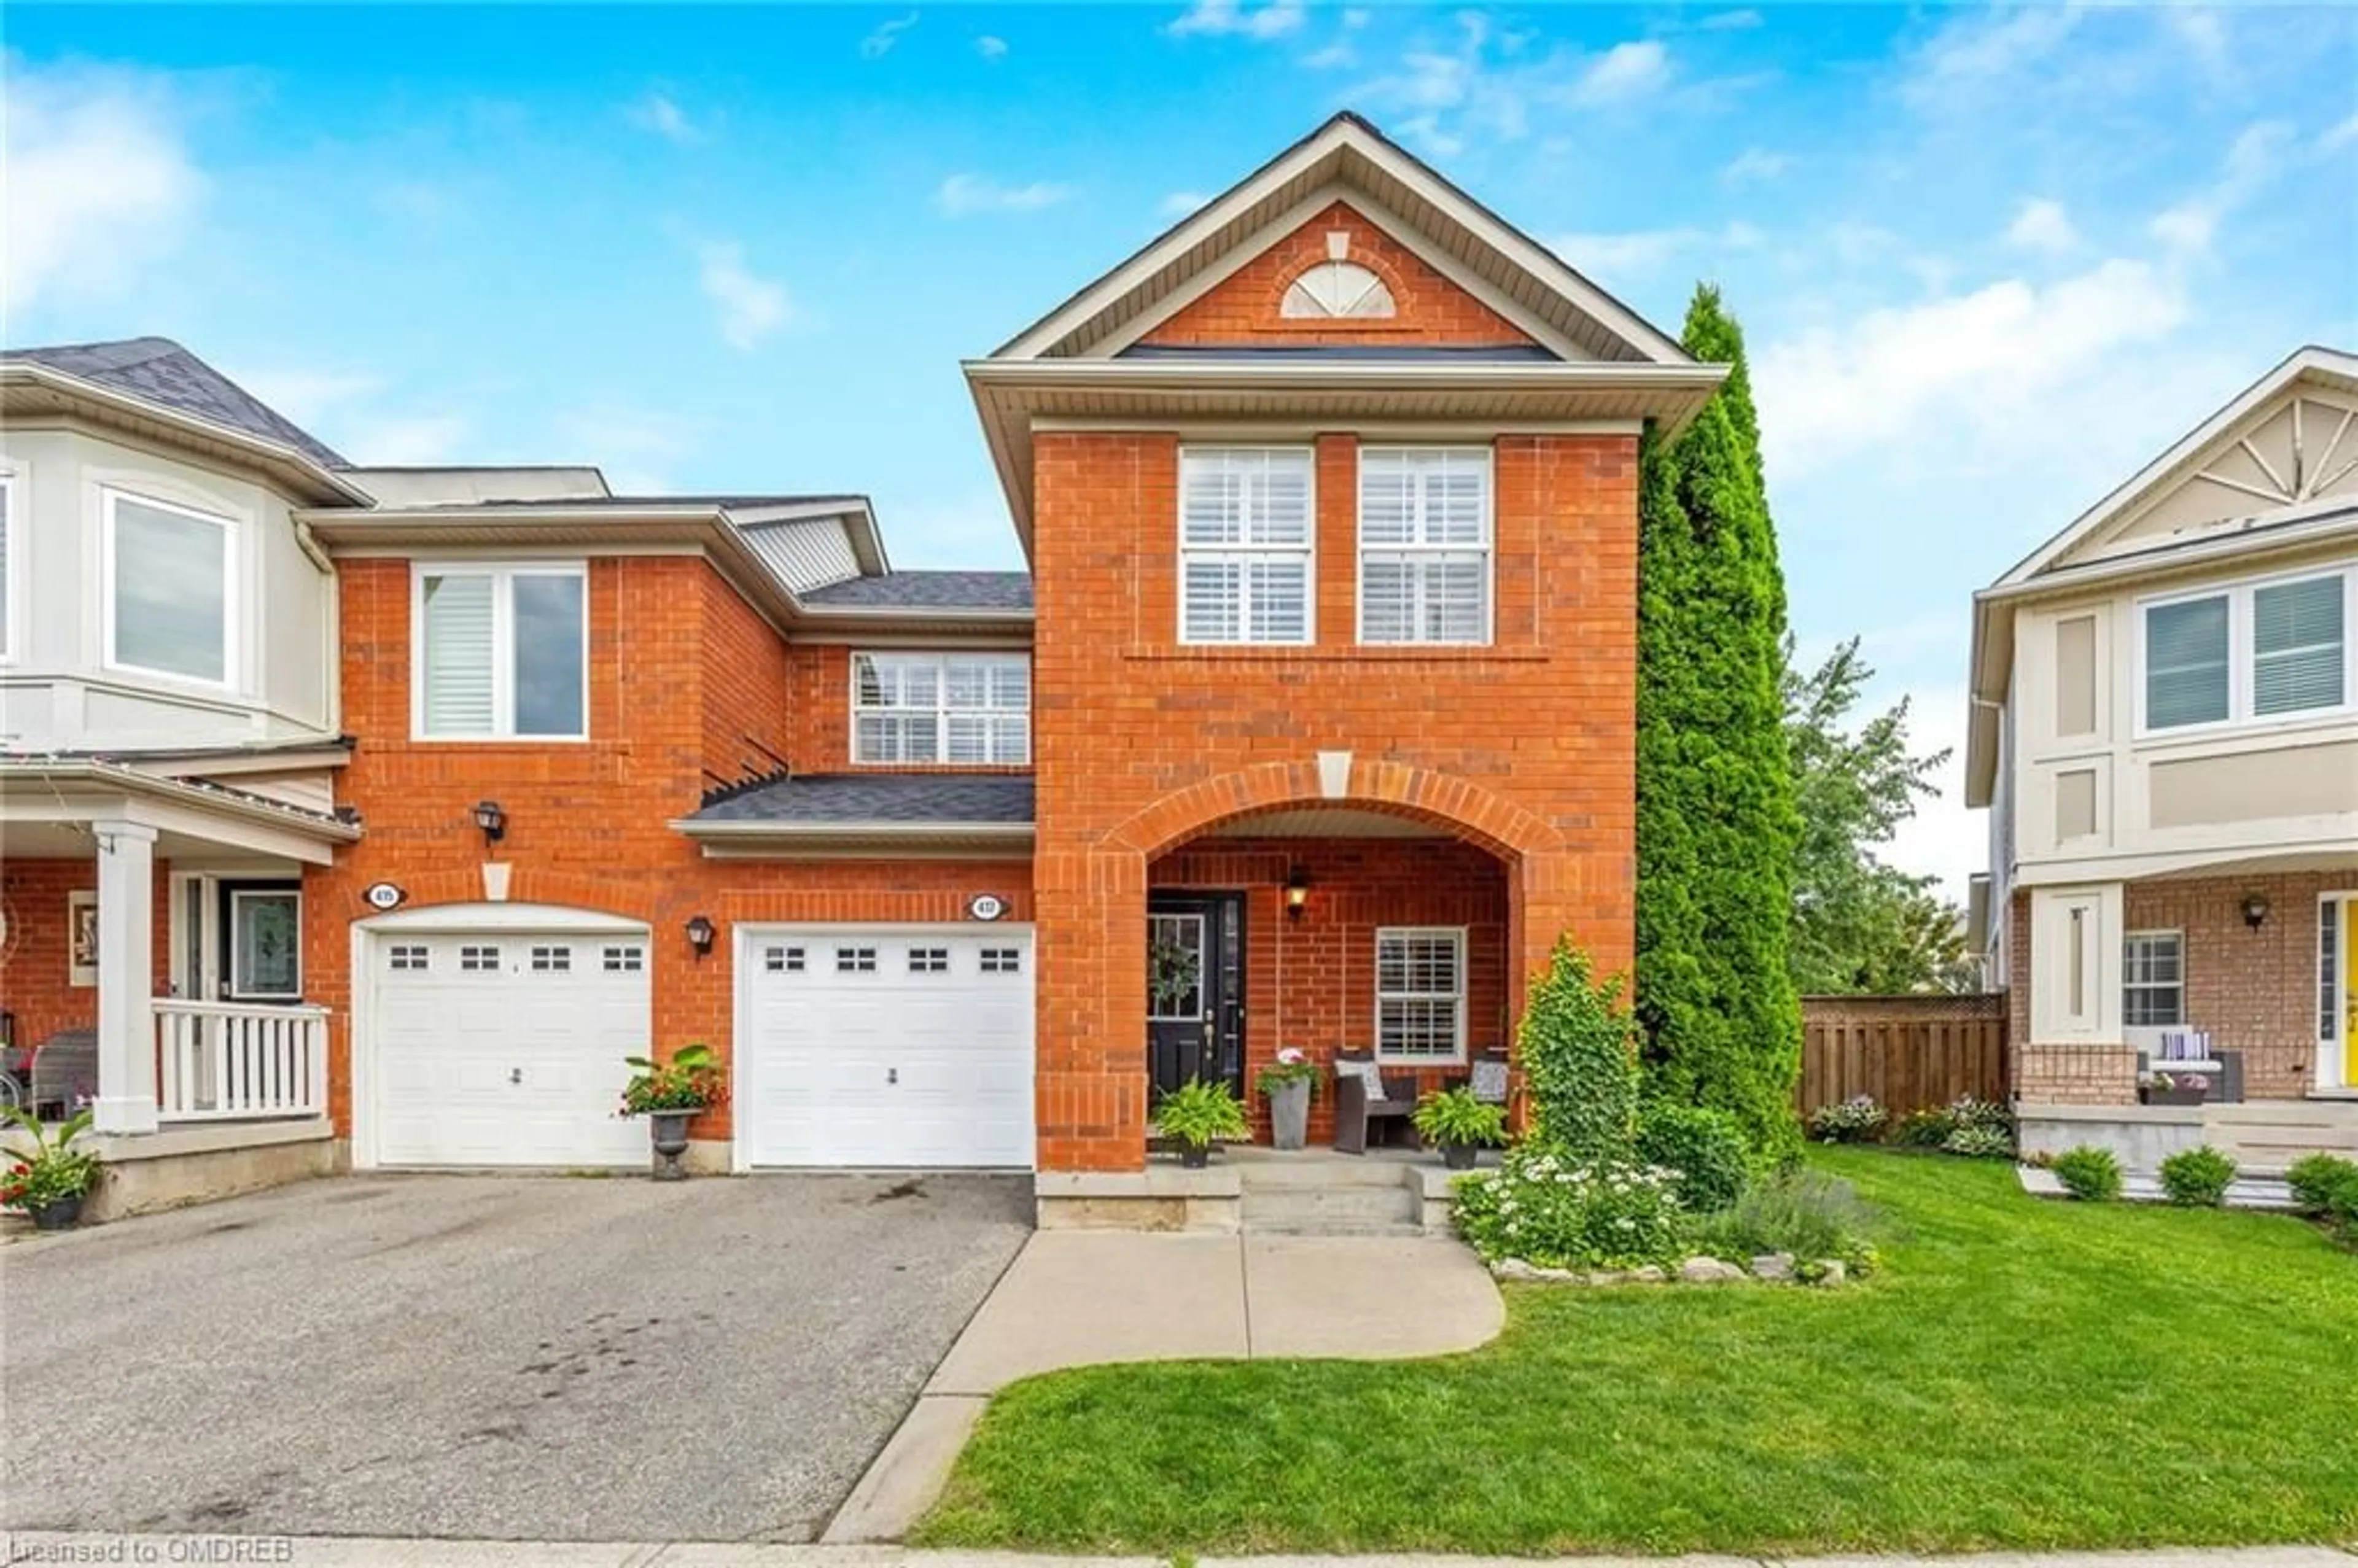 Home with brick exterior material for 417 Baverstock Cres, Milton Ontario L9T 5K7